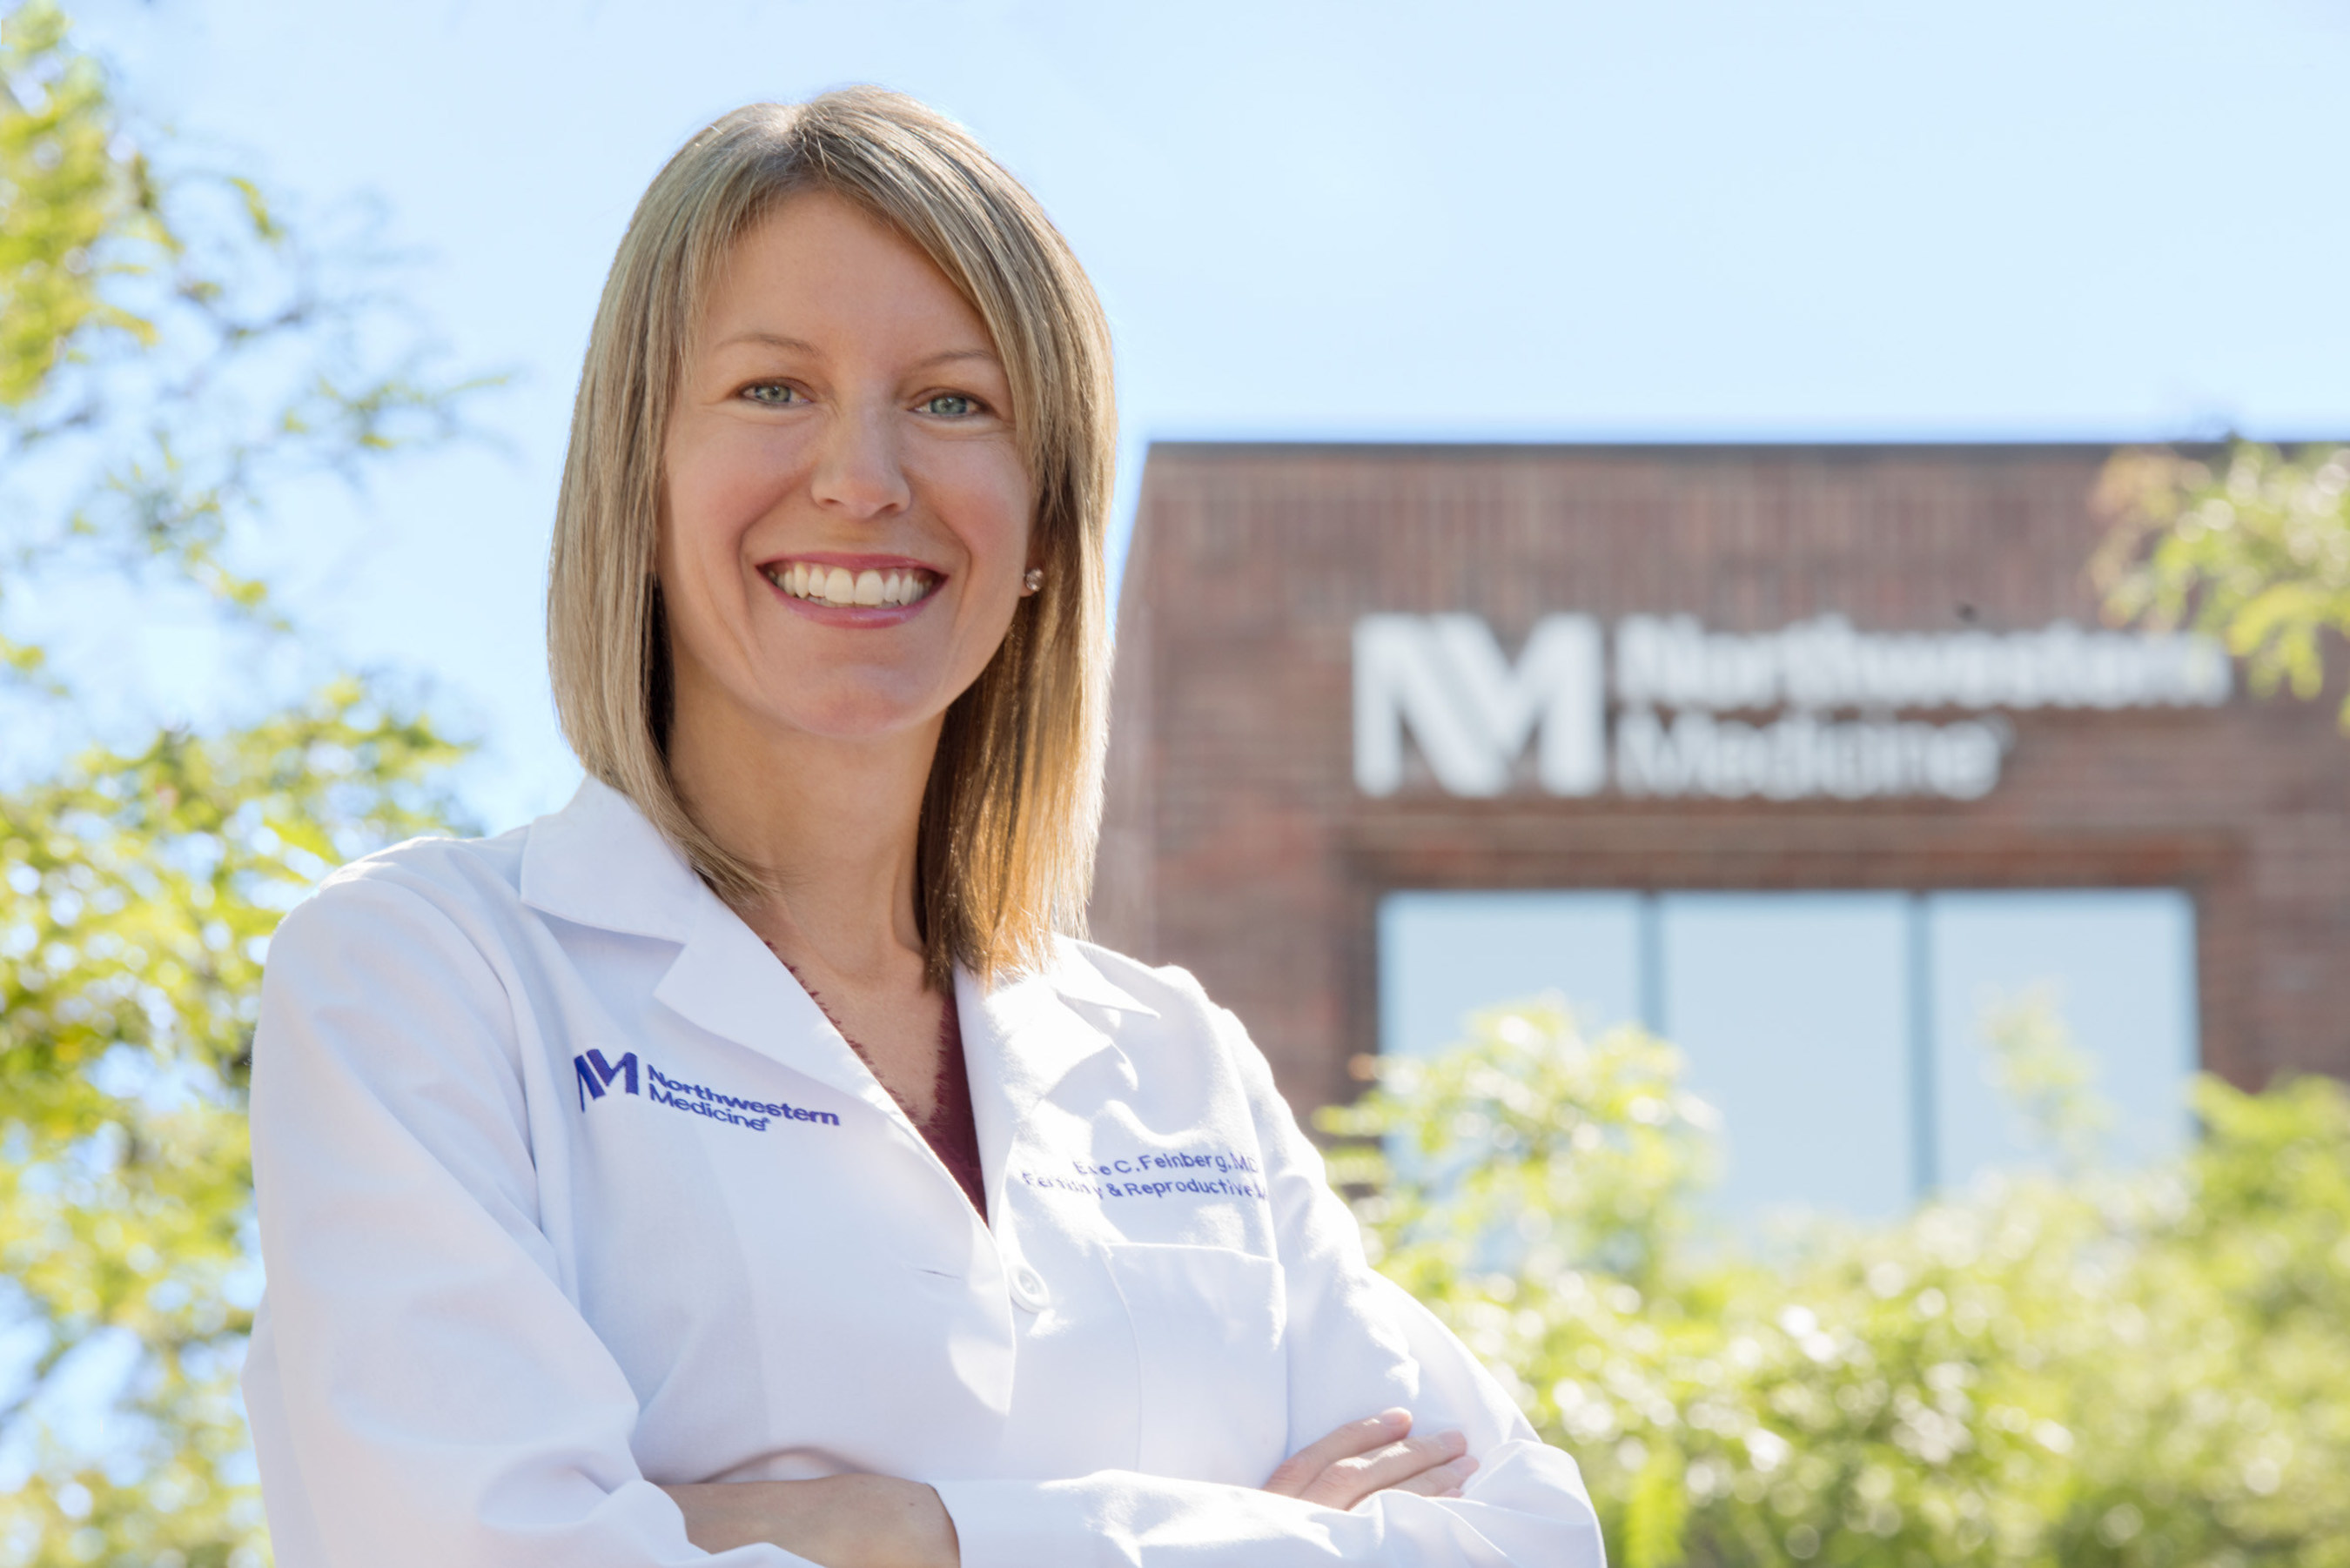 Eve Feinberg, MD, was recently named the Medical Director of Northwestern Medicine Fertility and Reproductive Medicine Services Highland Park. The longtime reproductive endocrinologist personally knows the struggles of infertility and will lead a multidisciplinary team for couples trying to start a family.